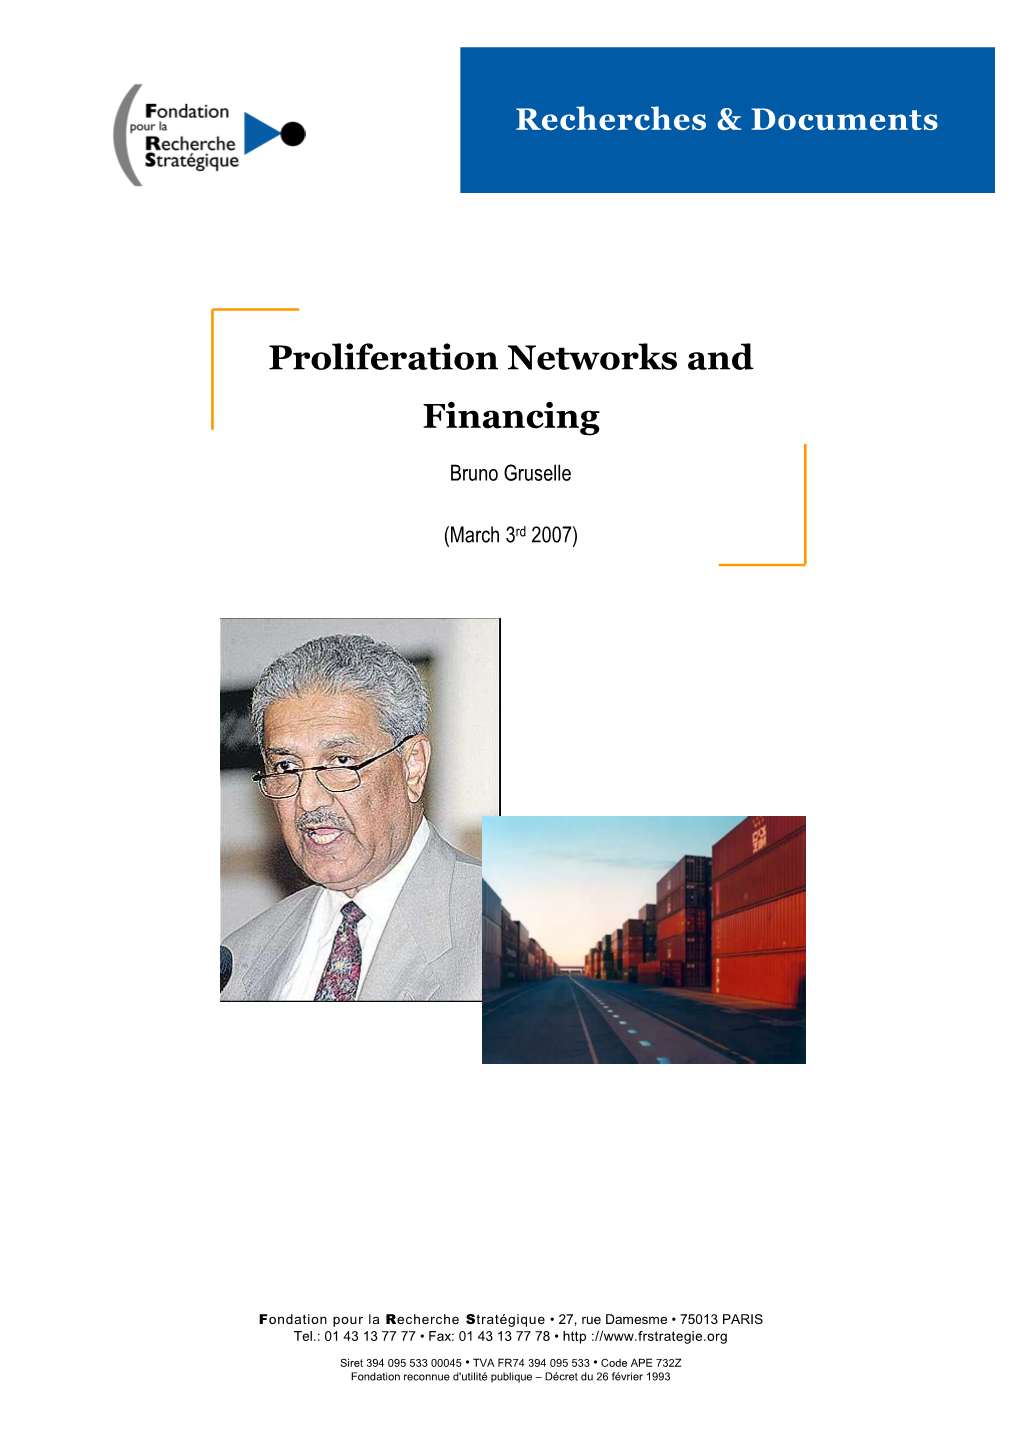 Proliferation Networks and Financing